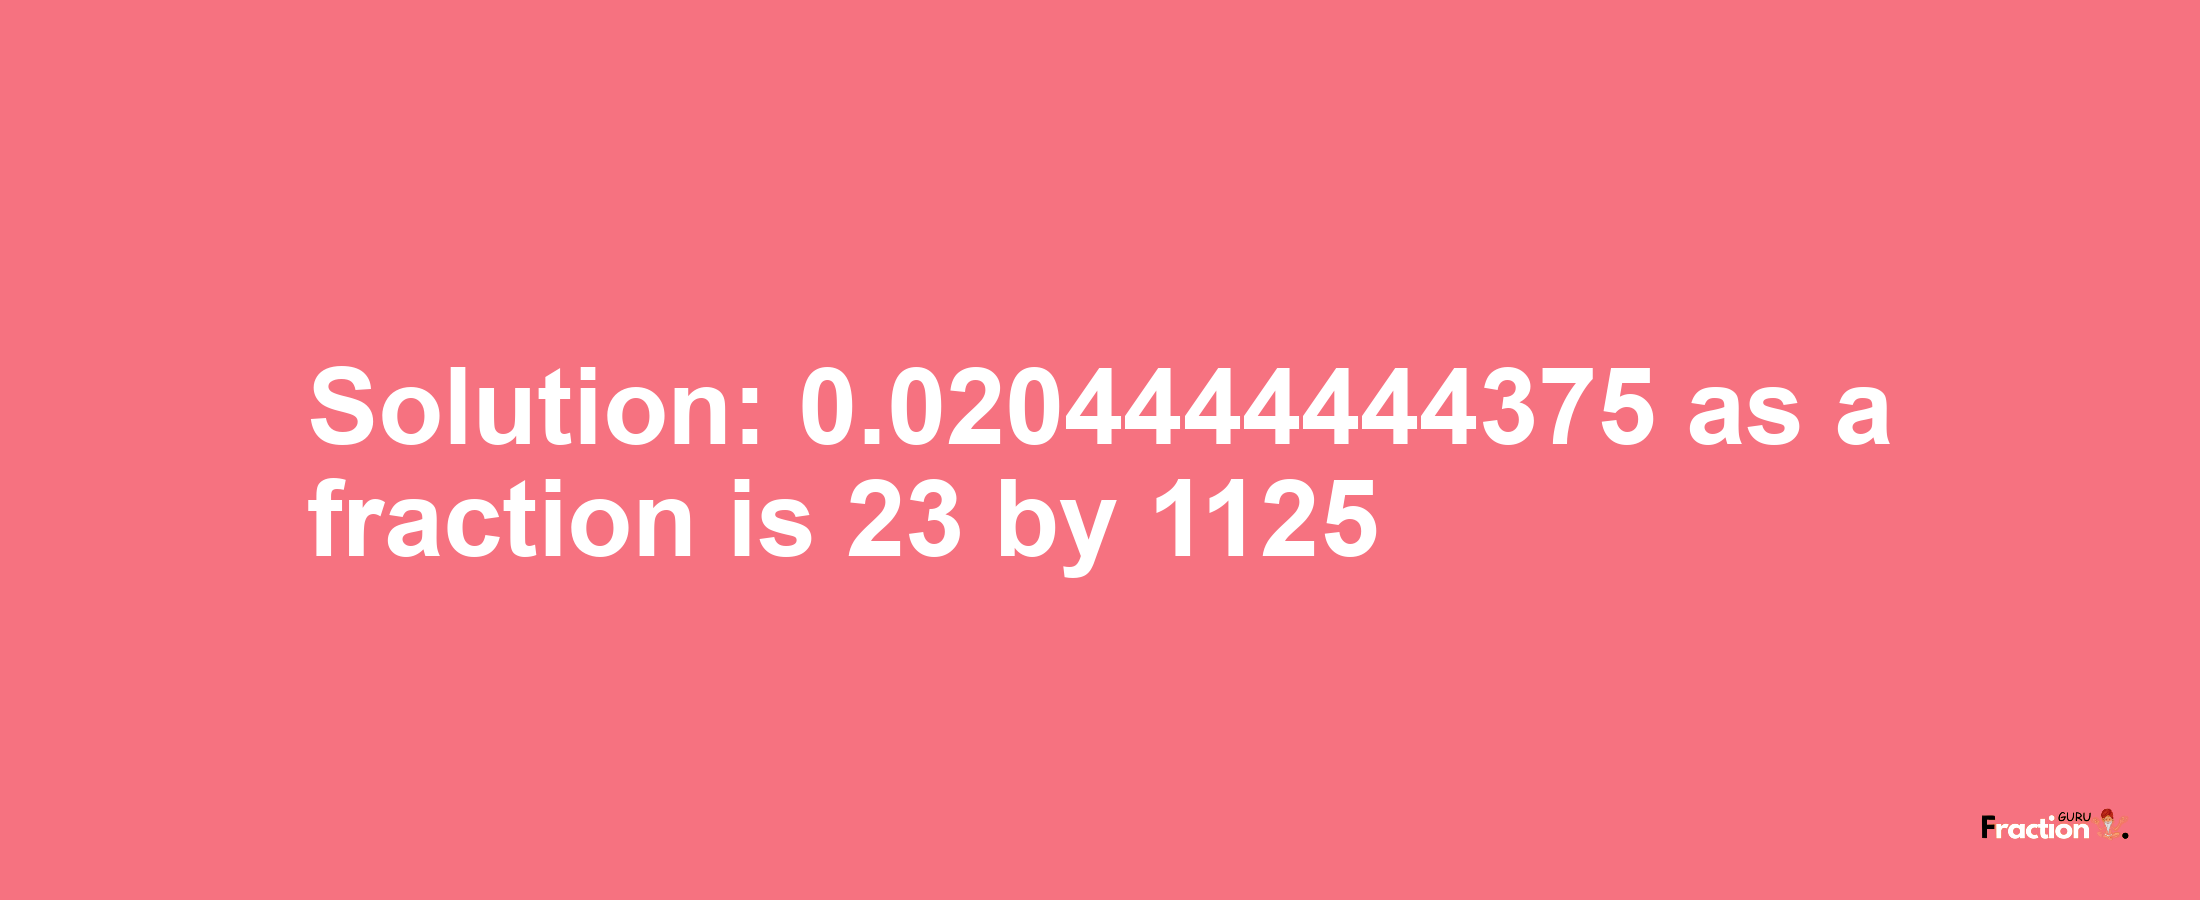 Solution:0.0204444444375 as a fraction is 23/1125